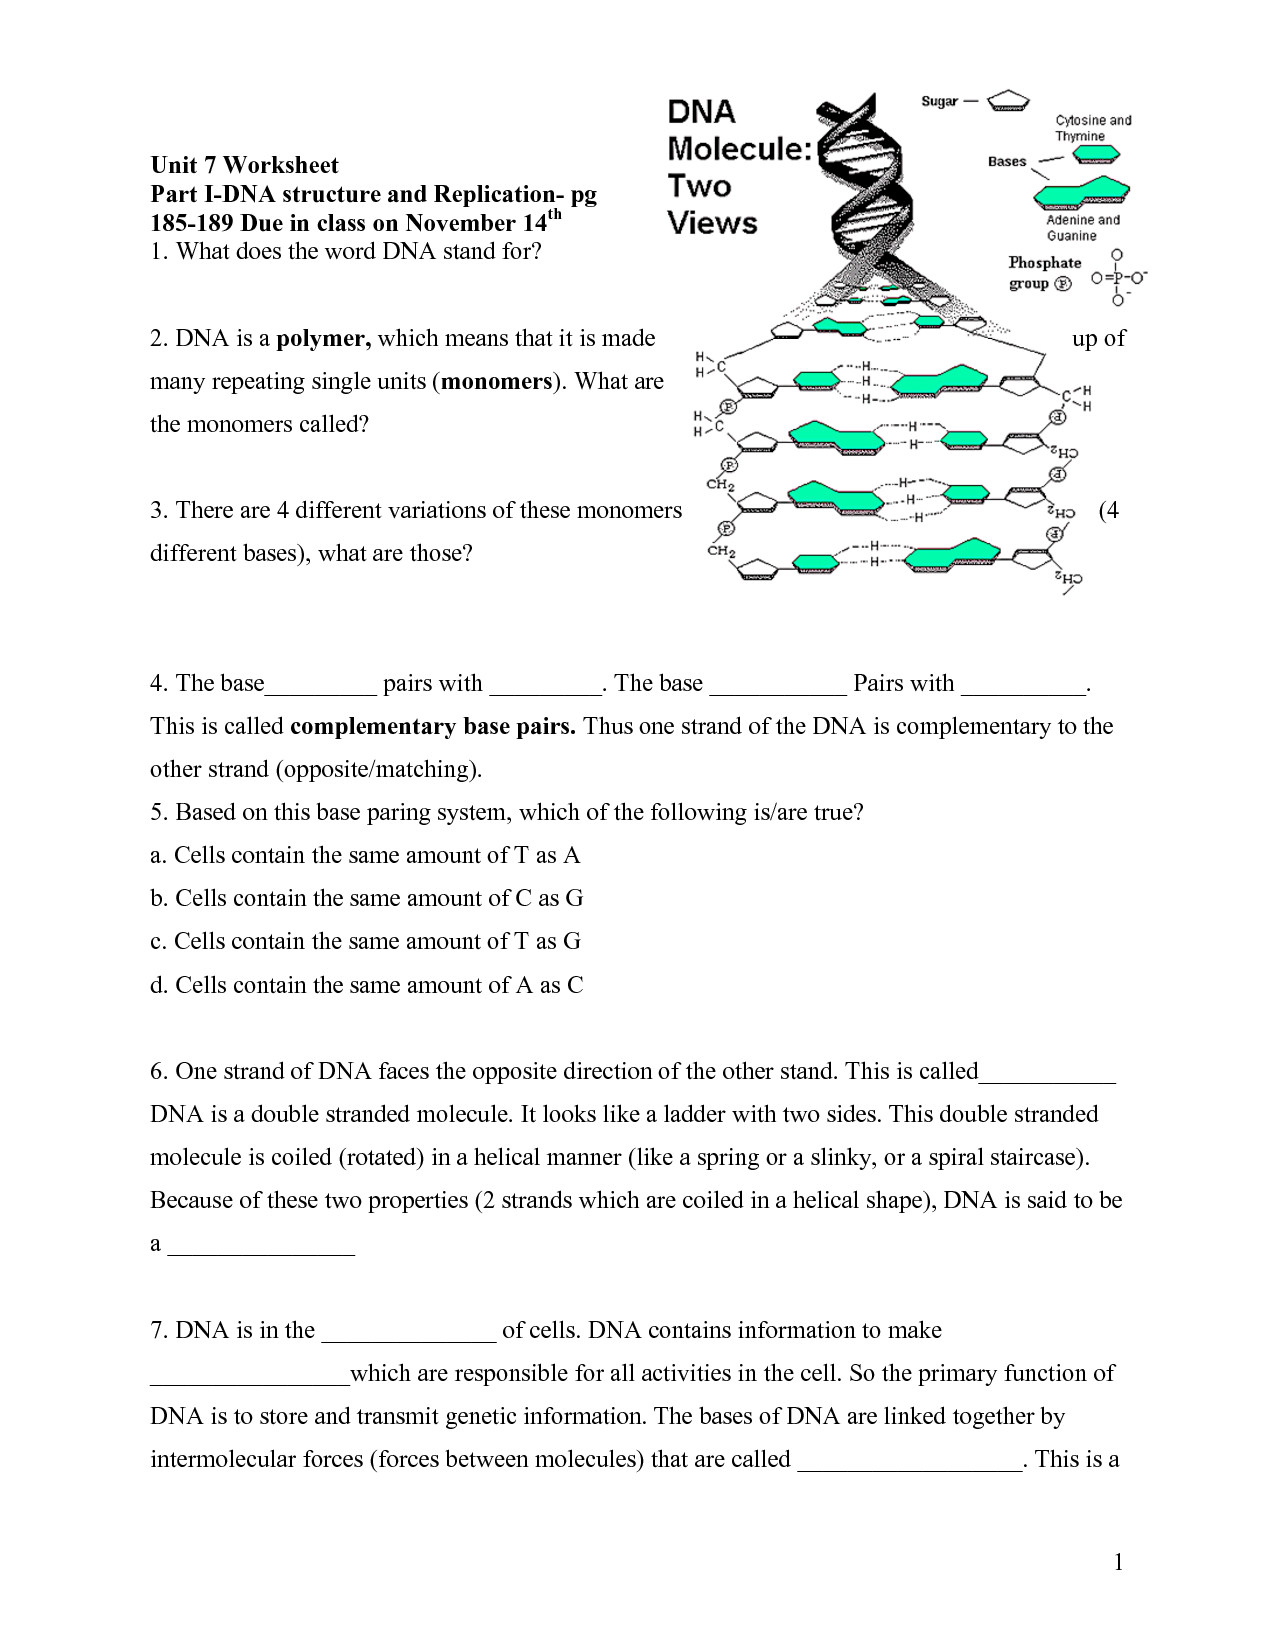 16-best-images-of-13-1-rna-worksheet-answer-key-chapter-11-dna-and-genes-worksheet-answers